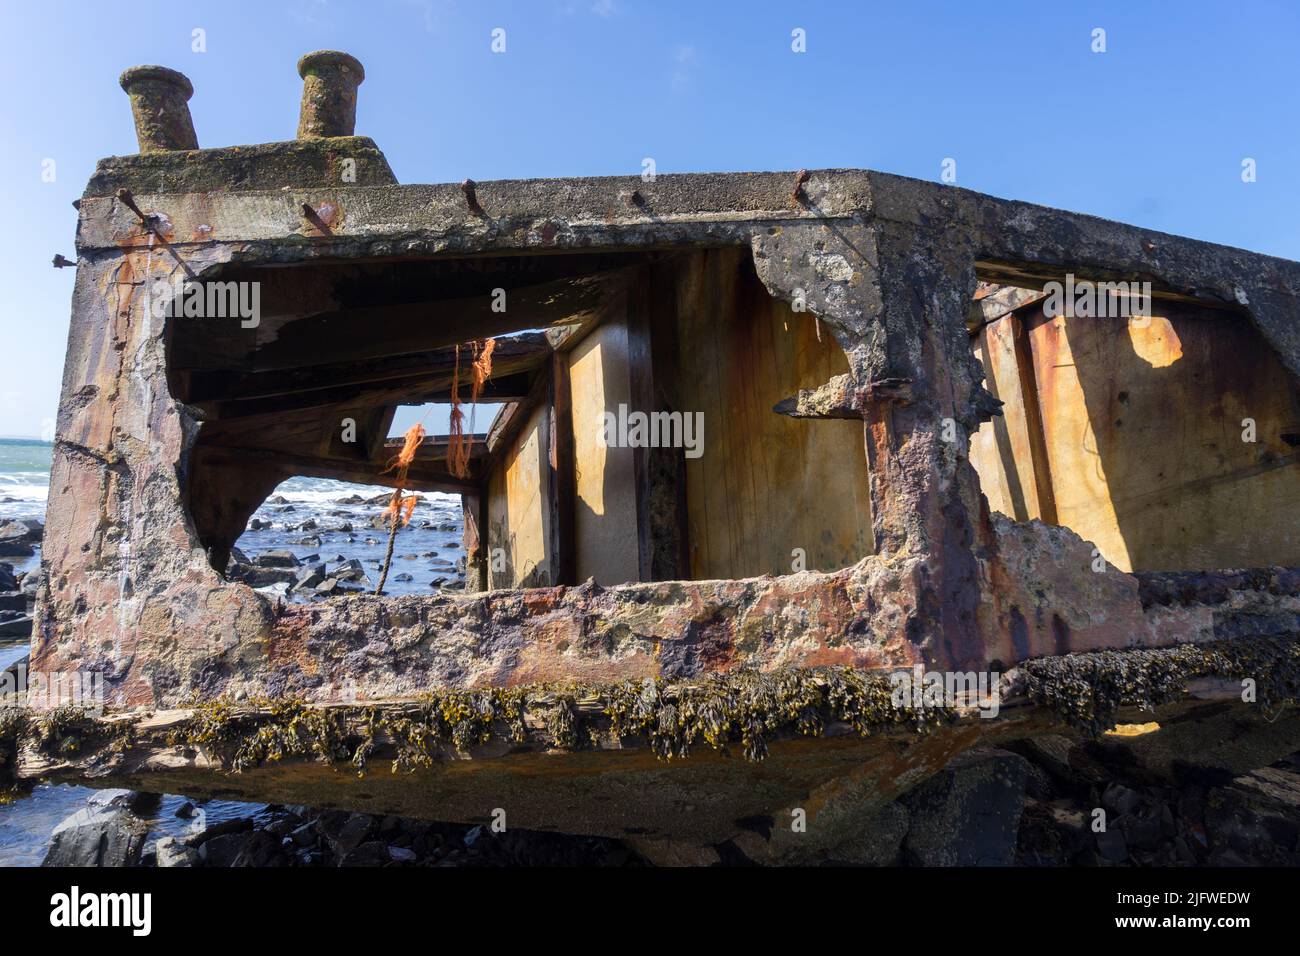 Remains of Mulberry Harbours at Garlieston Bay where they were tested in 1943 Stock Photo